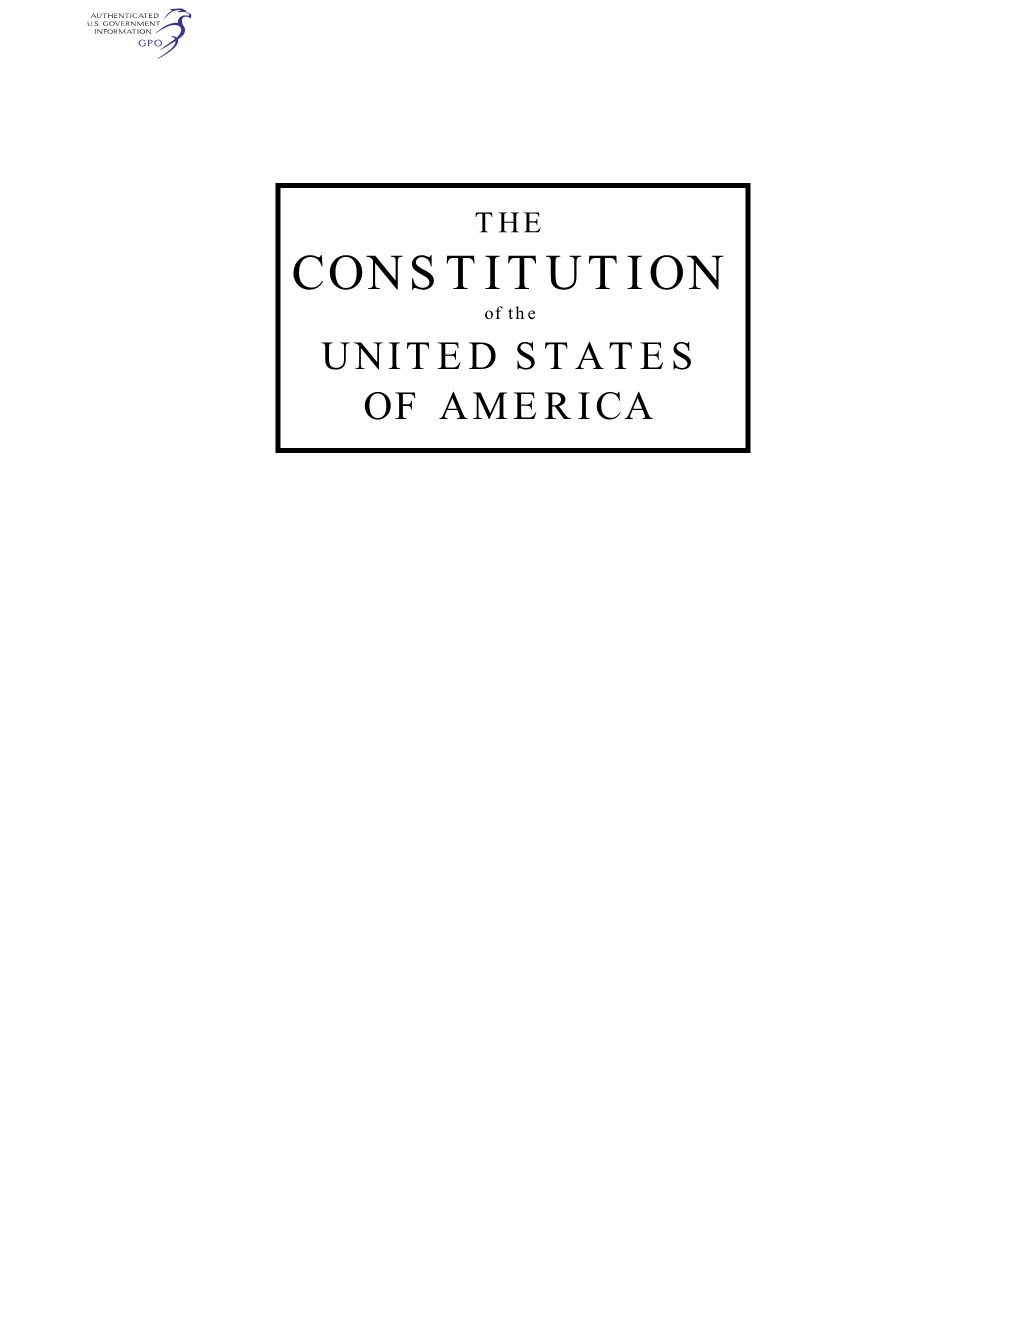 CONSTITUTION of the UNITED STATES of AMERICA